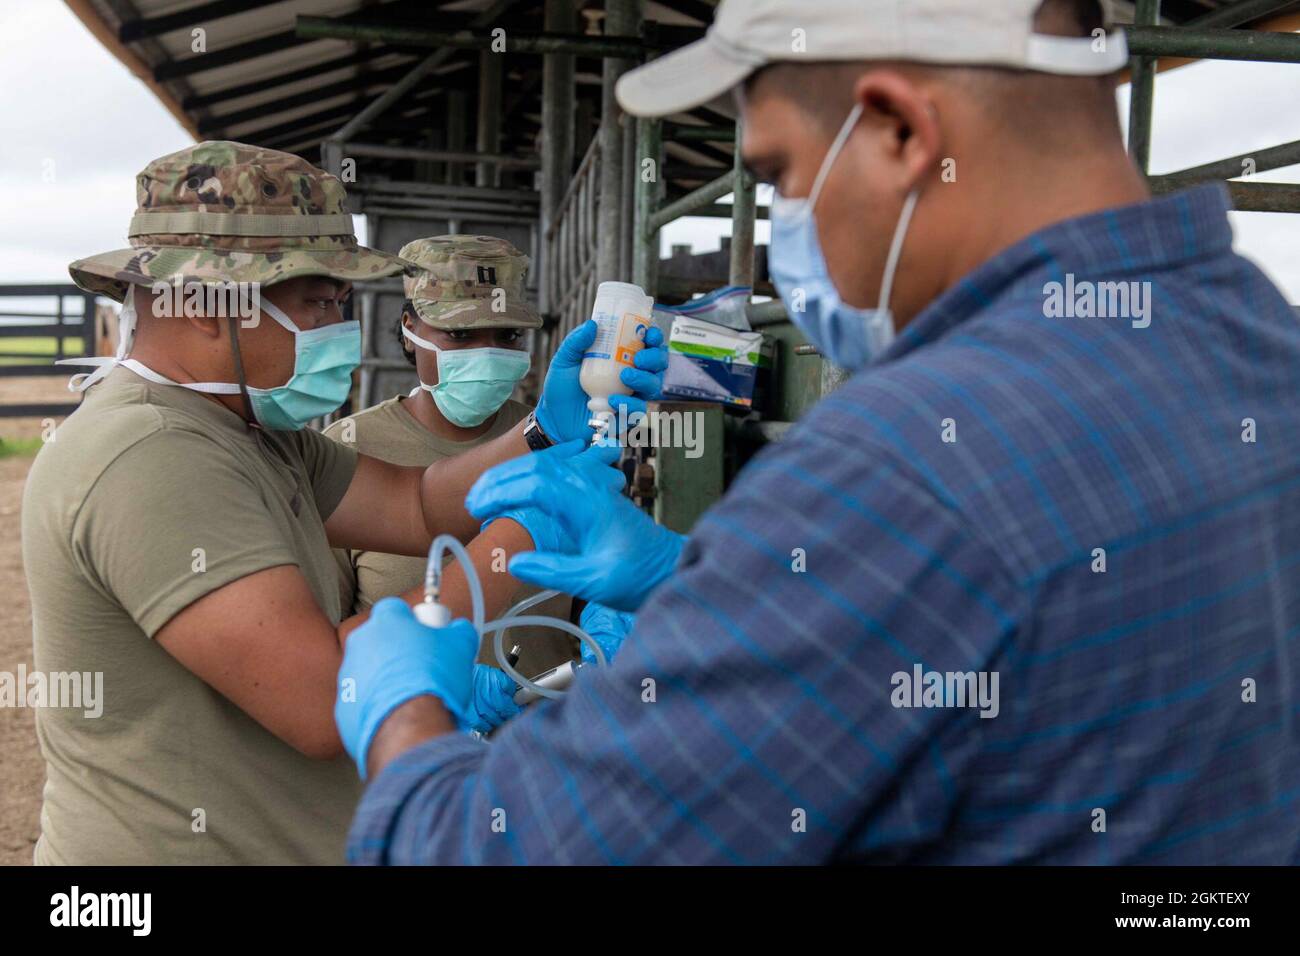 U.S. Army Staff Sgt. Rene Aventura (left), a field veterinary service technician and U.S. Army Capt. Shanell Thomas, (center) a veterinarian both with the 109th Medical Detachment Veterinary Services out of Garden Grove, Calif., helps local veterinarian, Set Samayoa, prepare vaccines for cattle during Resolute Sentinel 21 in Melchor De Mencos, Guatemala, June 29, 2021. RS-21 is an exercise to train U.S. and partner nation military engineers, veterinary personnel and medical professionals for humanitarian assistance and defense interoperability operations. Stock Photo